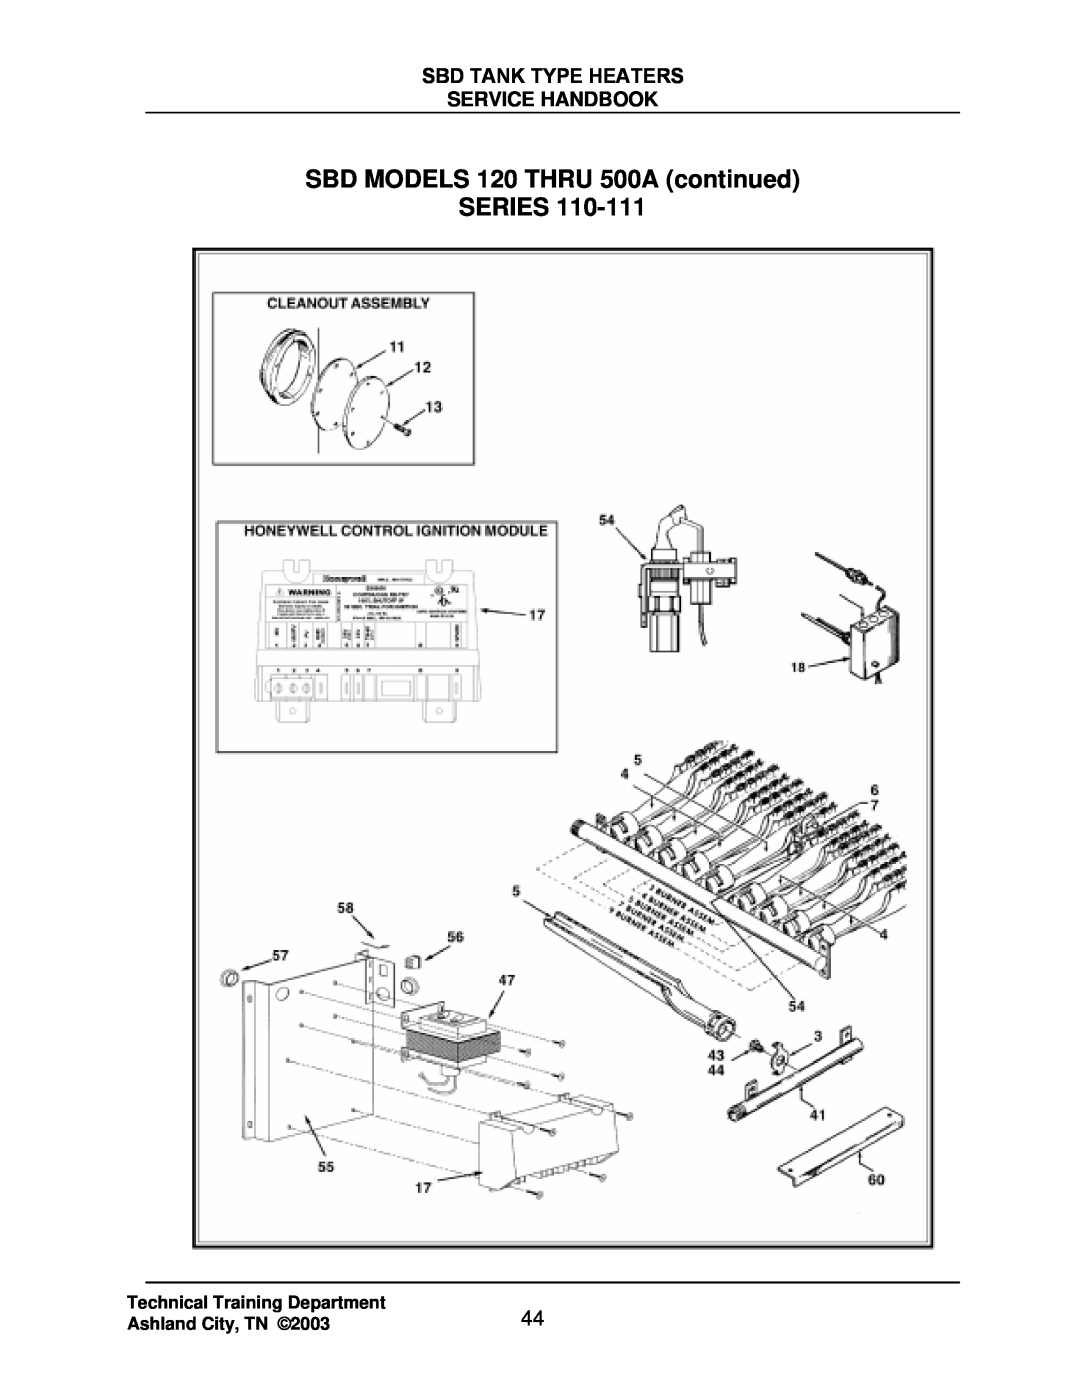 State Industries SBD71 120, SBD85 500 SBD MODELS 120 THRU 500A continued SERIES, Sbd Tank Type Heaters, Service Handbook 